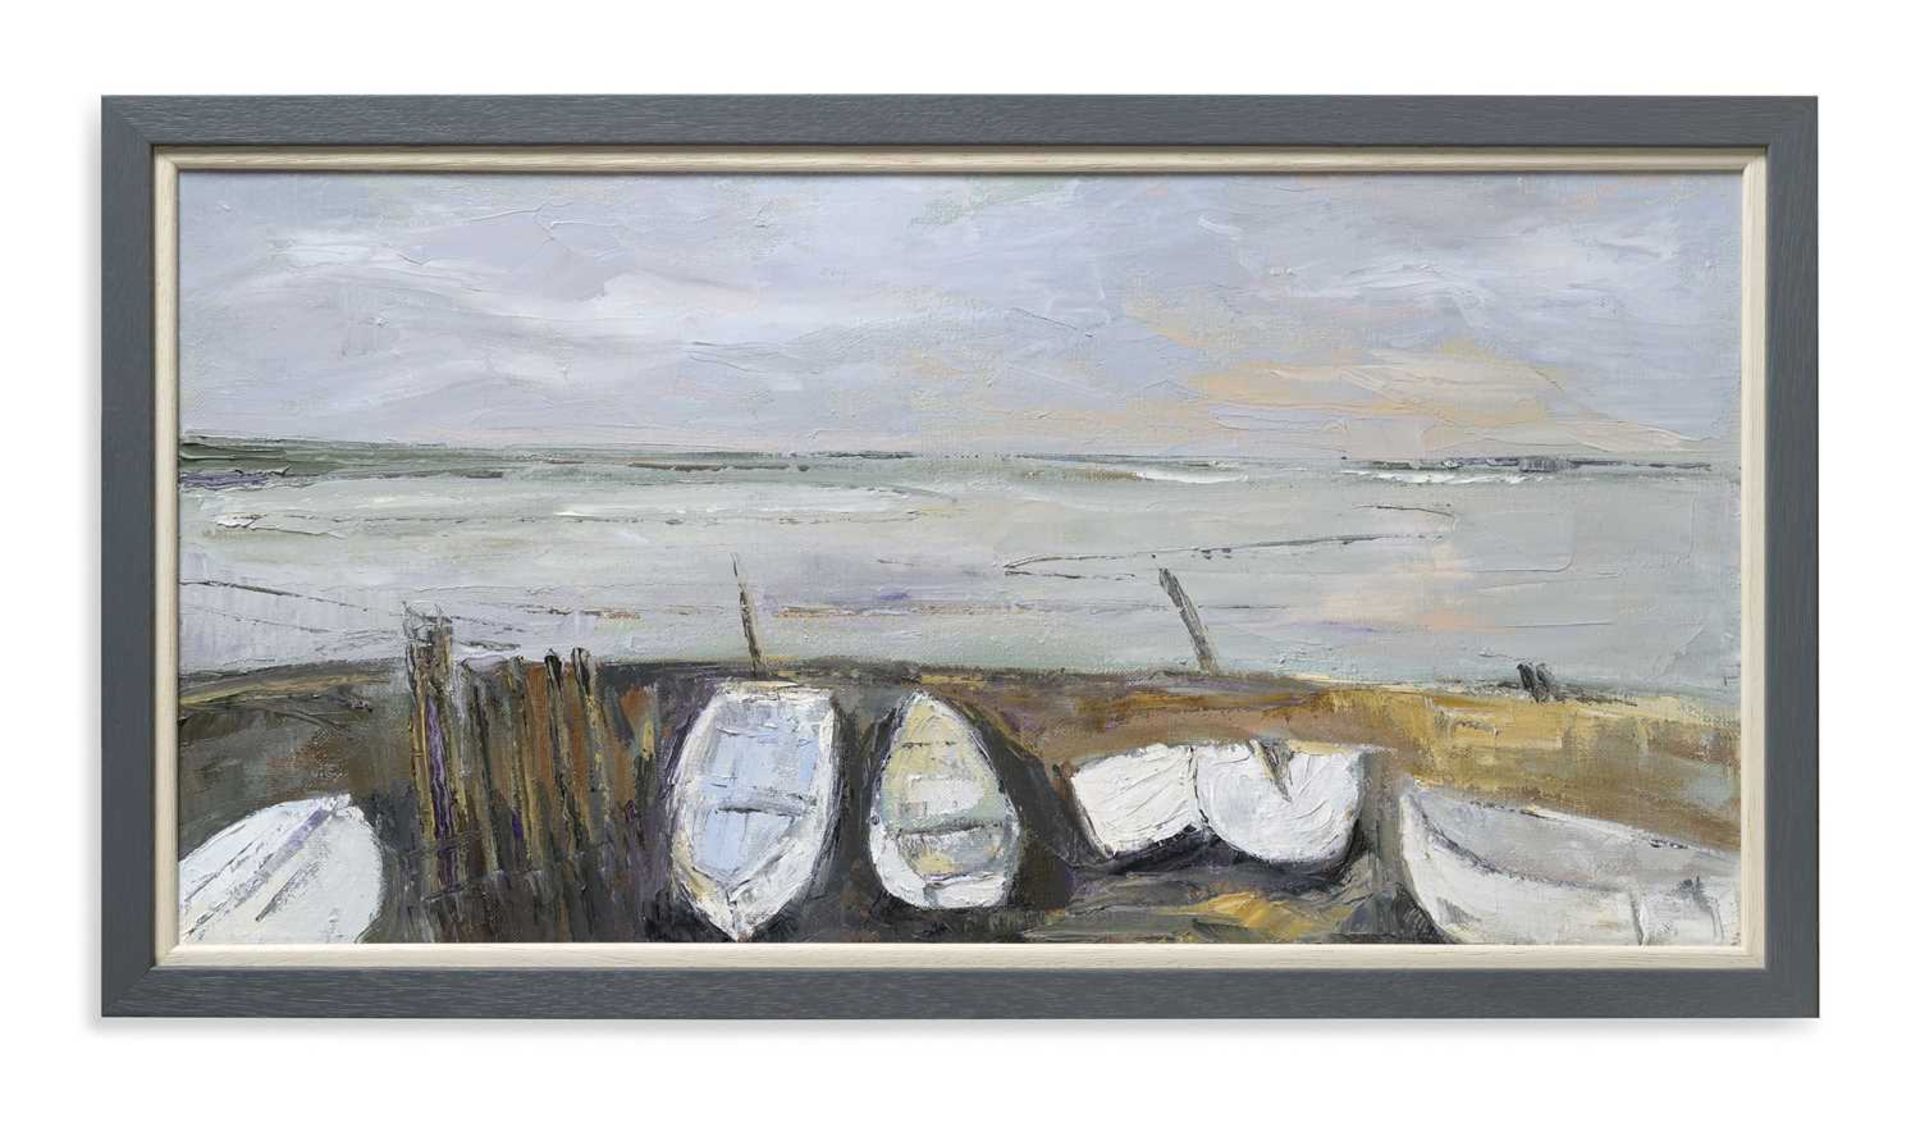 Cris Coe Painting Boats at Felixstowe Ferry, Suffolk   To the north of Felixstowe is the tiny